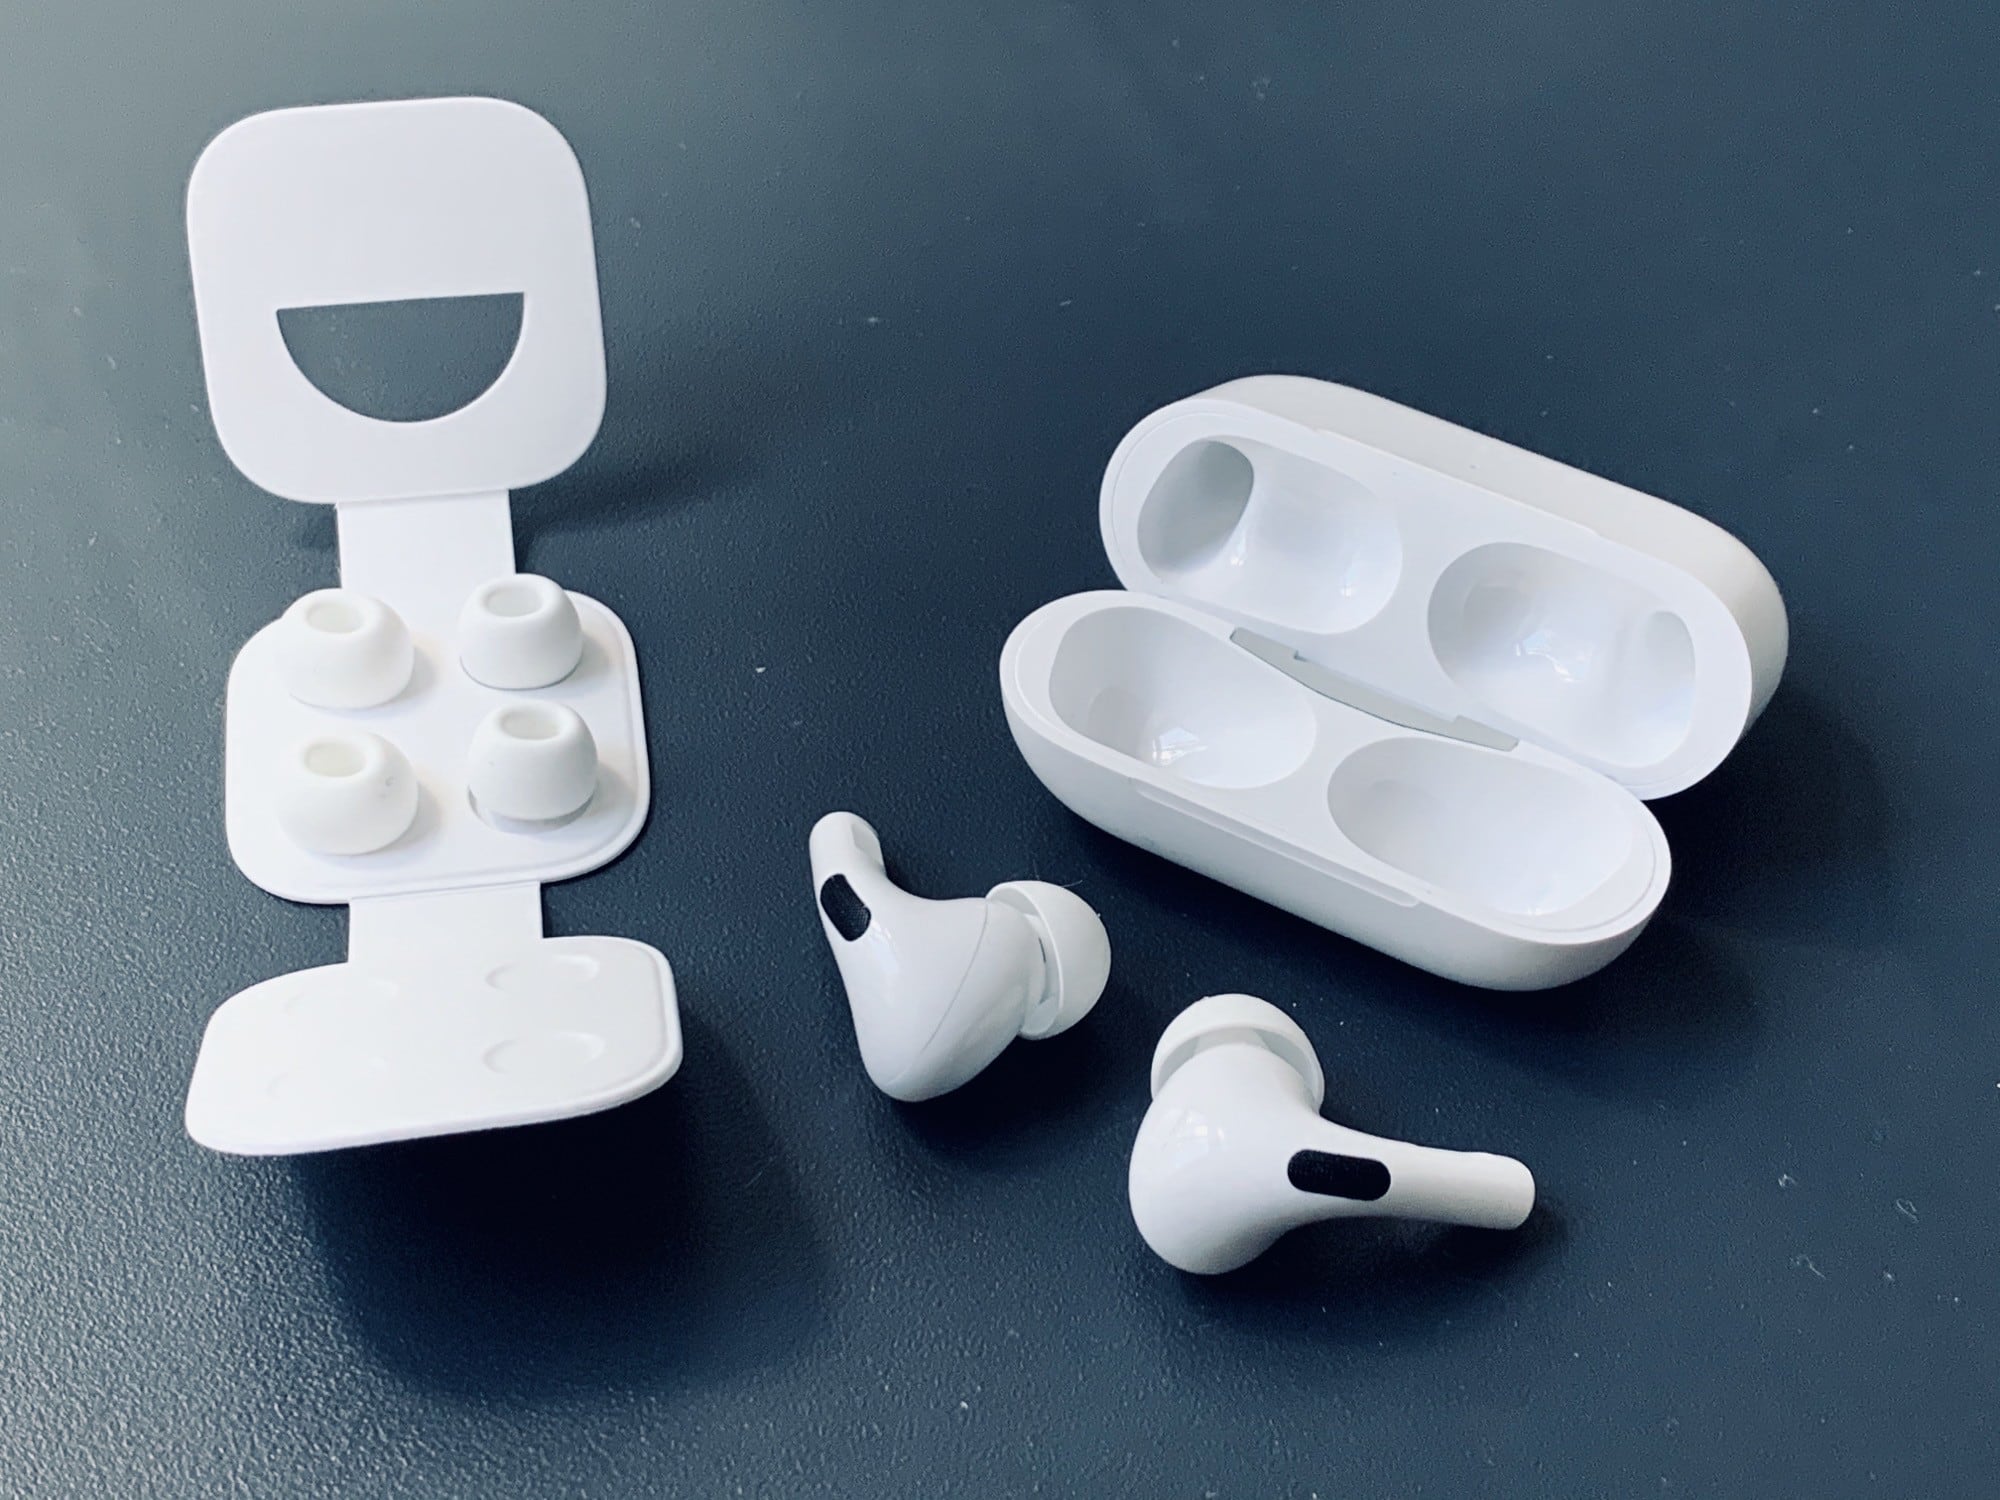 The AirPods Pro come with three pairs of tips